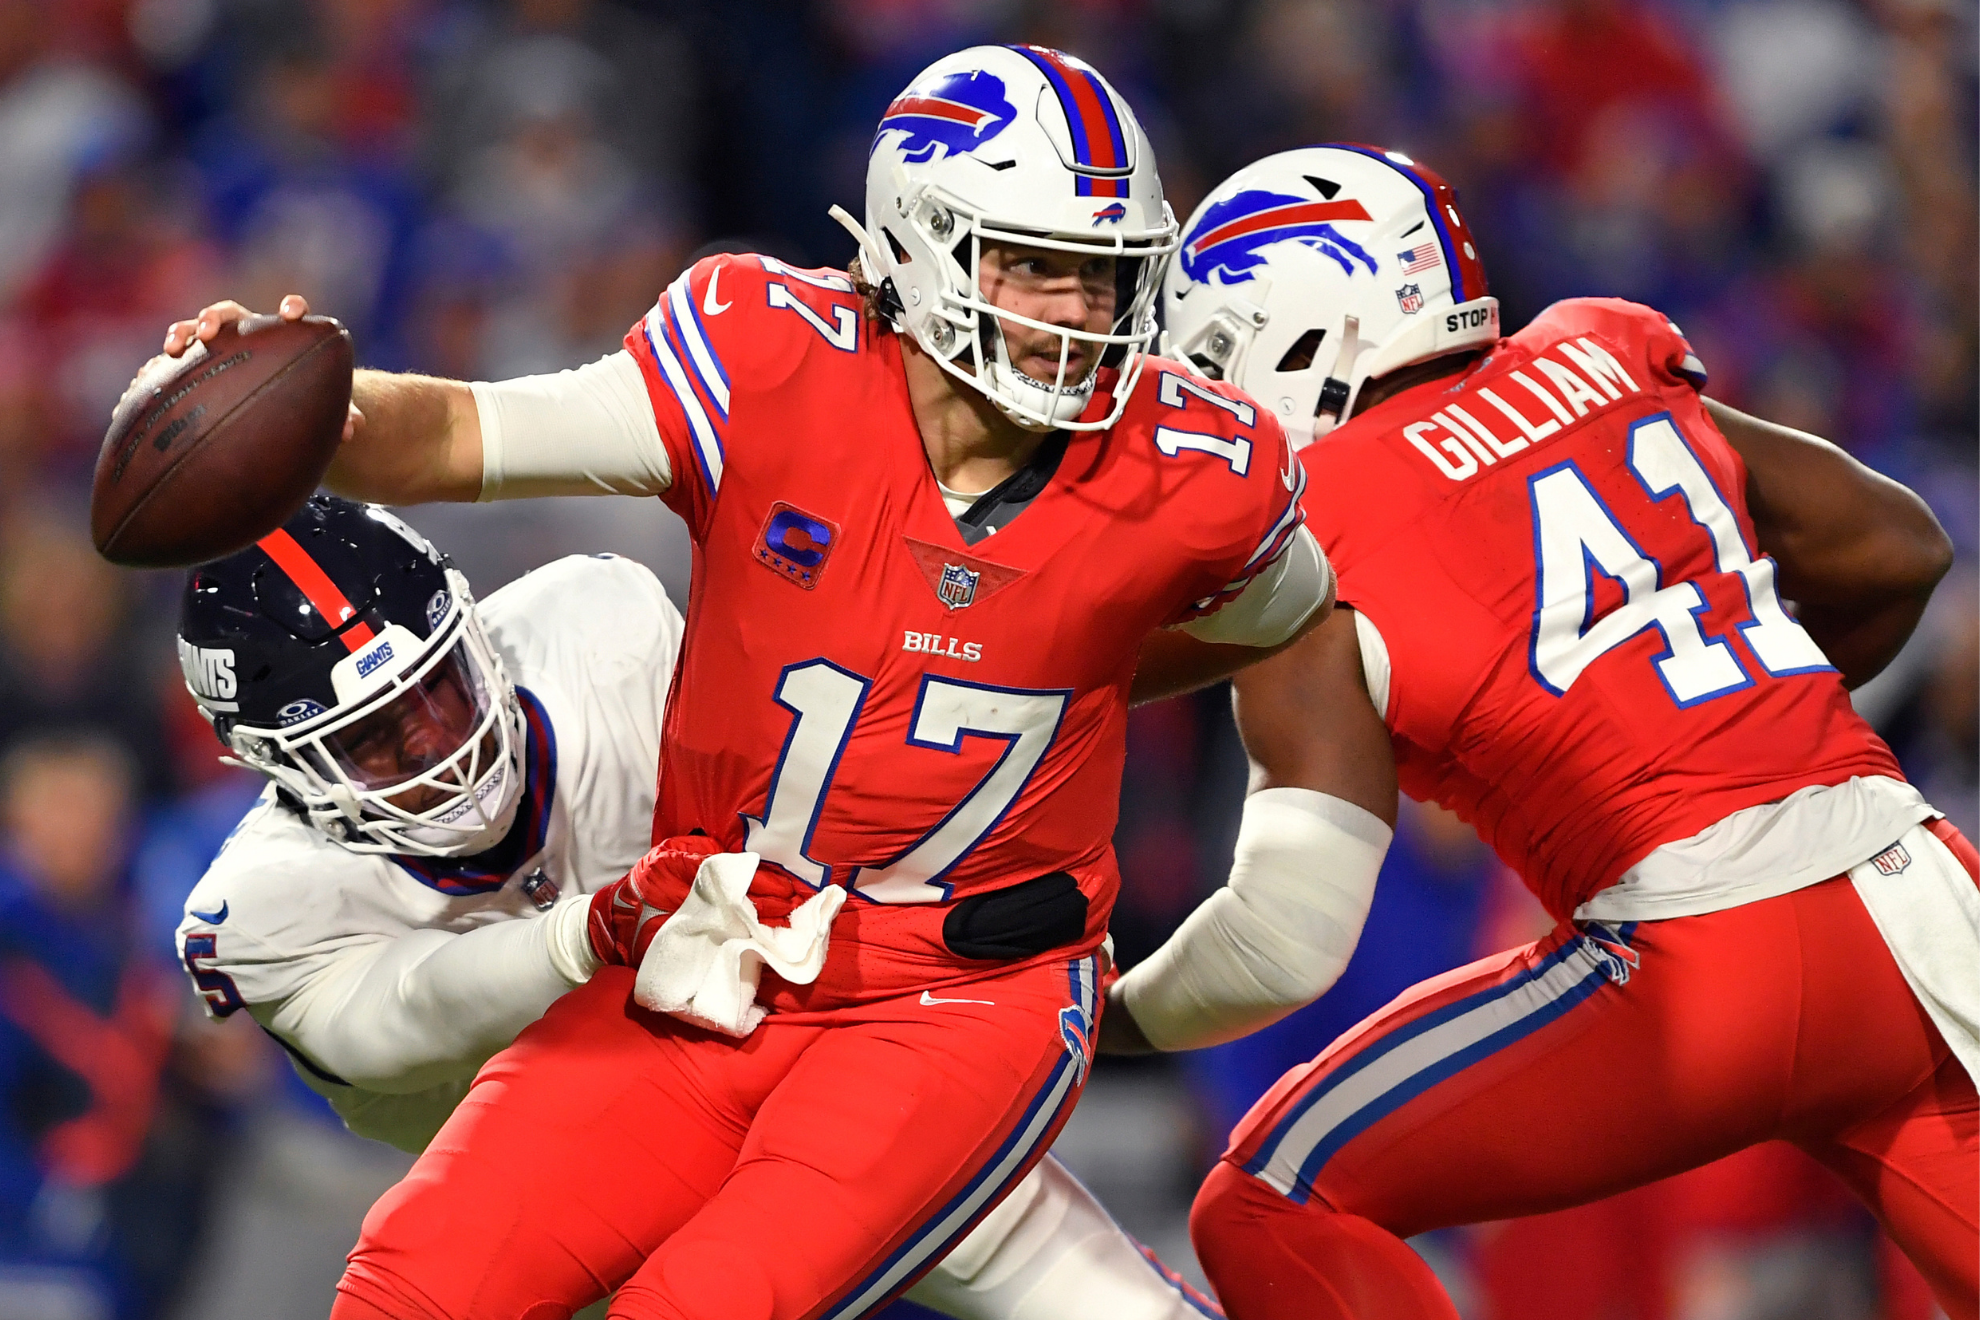 Josh Allen and the Bills won a slugfest against the visiting Giants.